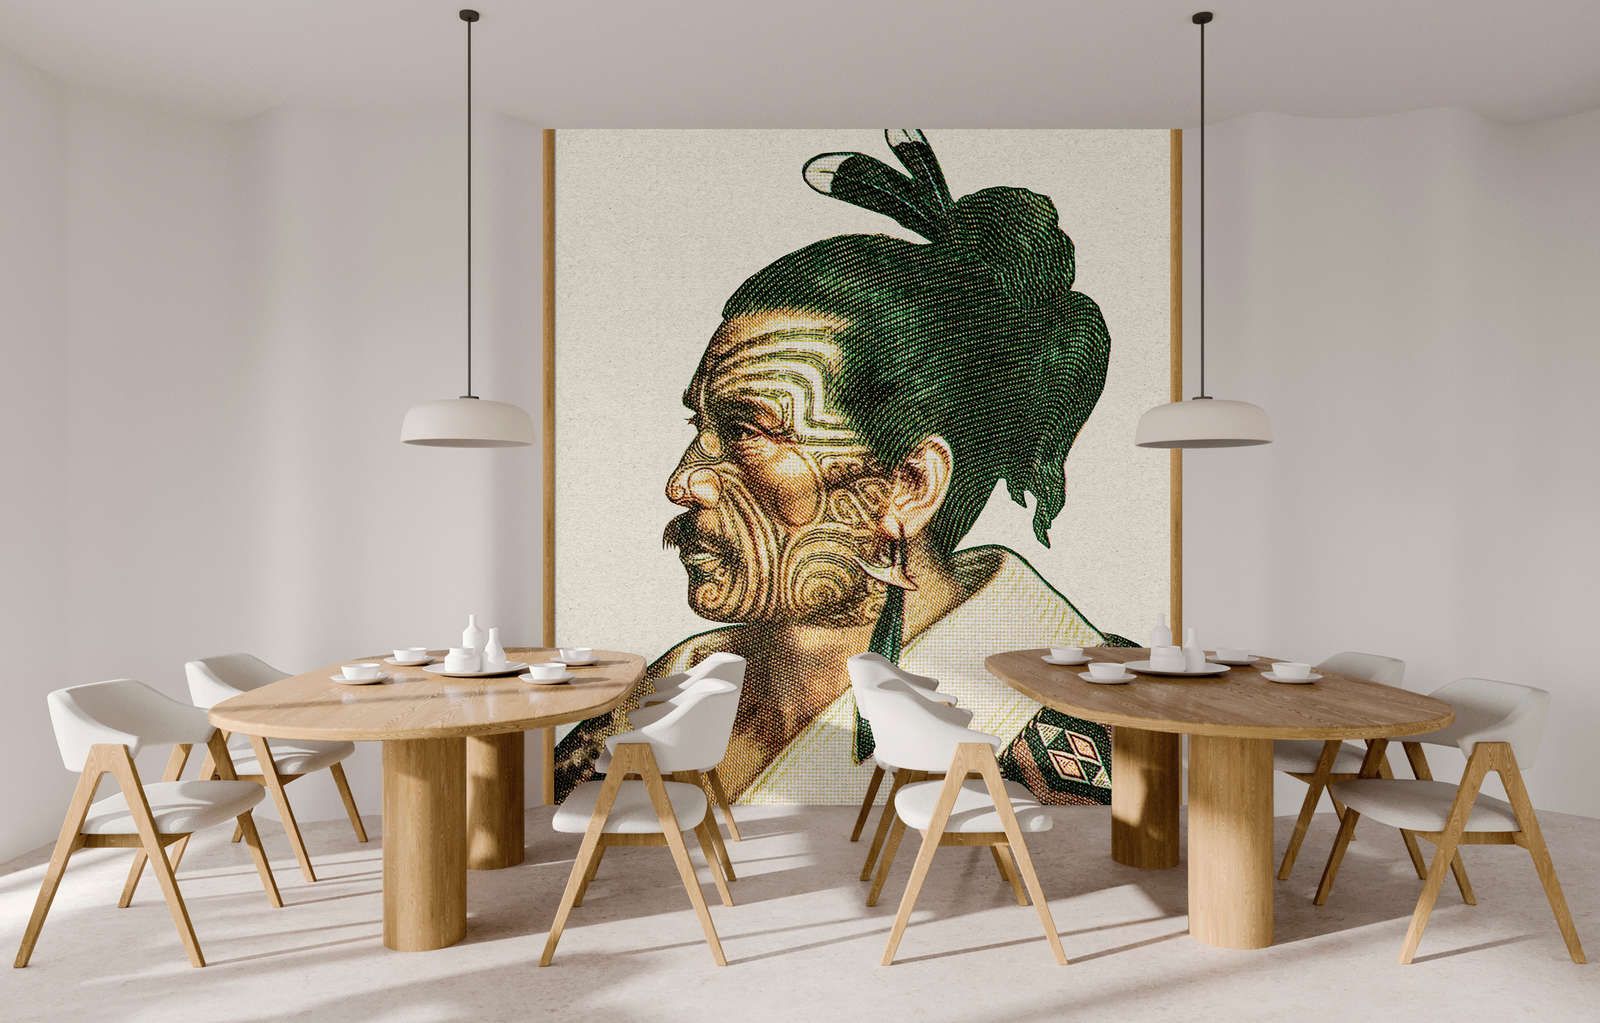             Photo wallpaper »horishi« - African portrait in pixel style with kraft paper texture - Smooth, slightly pearly shimmering non-woven fabric
        